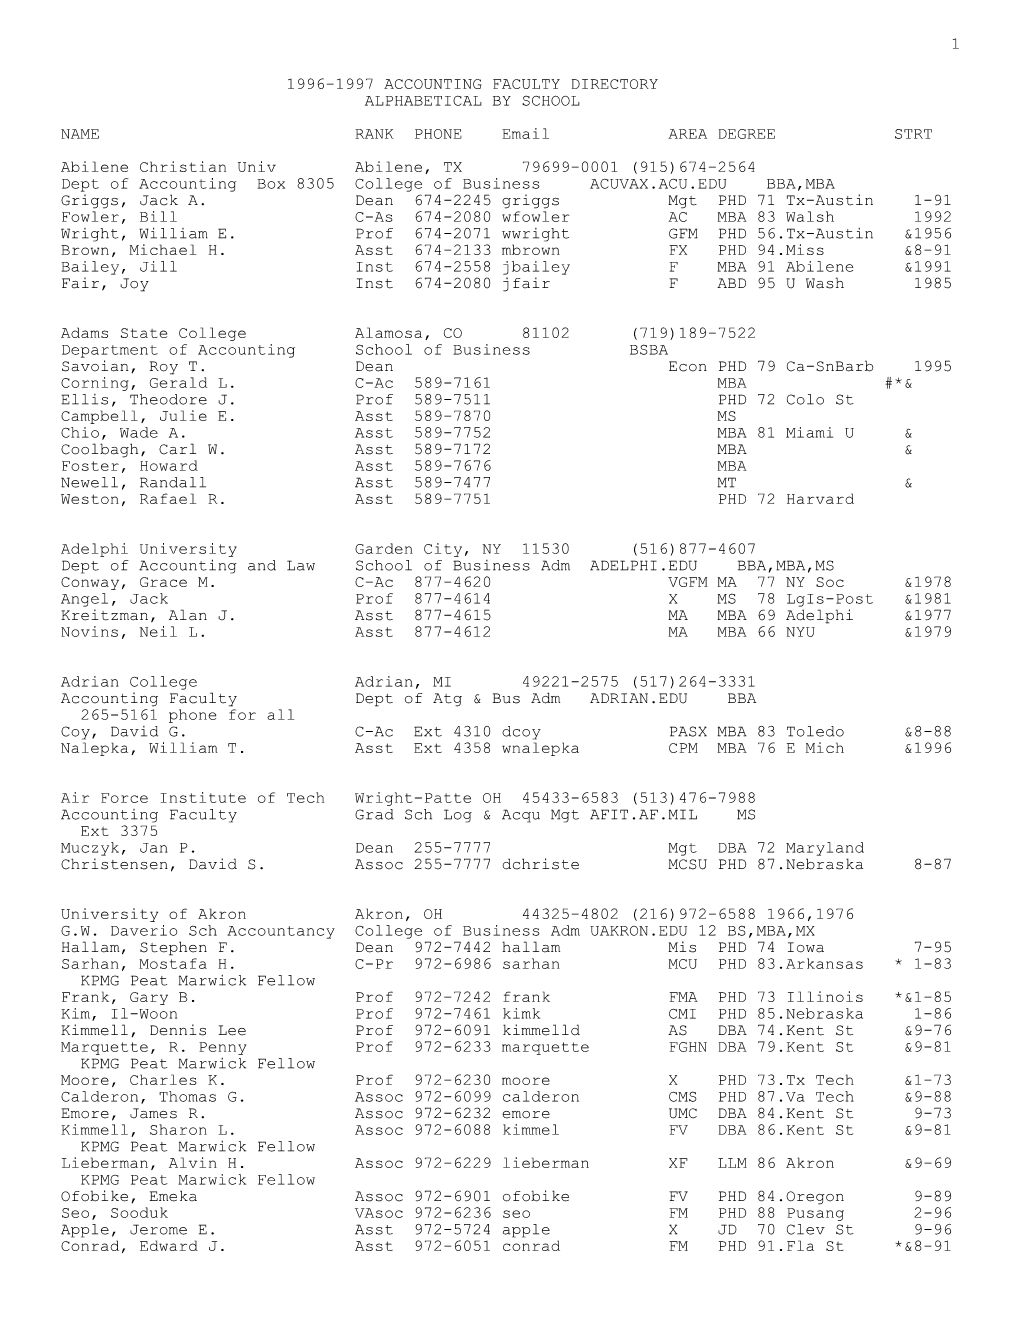 1 1996-1997 Accounting Faculty Directory